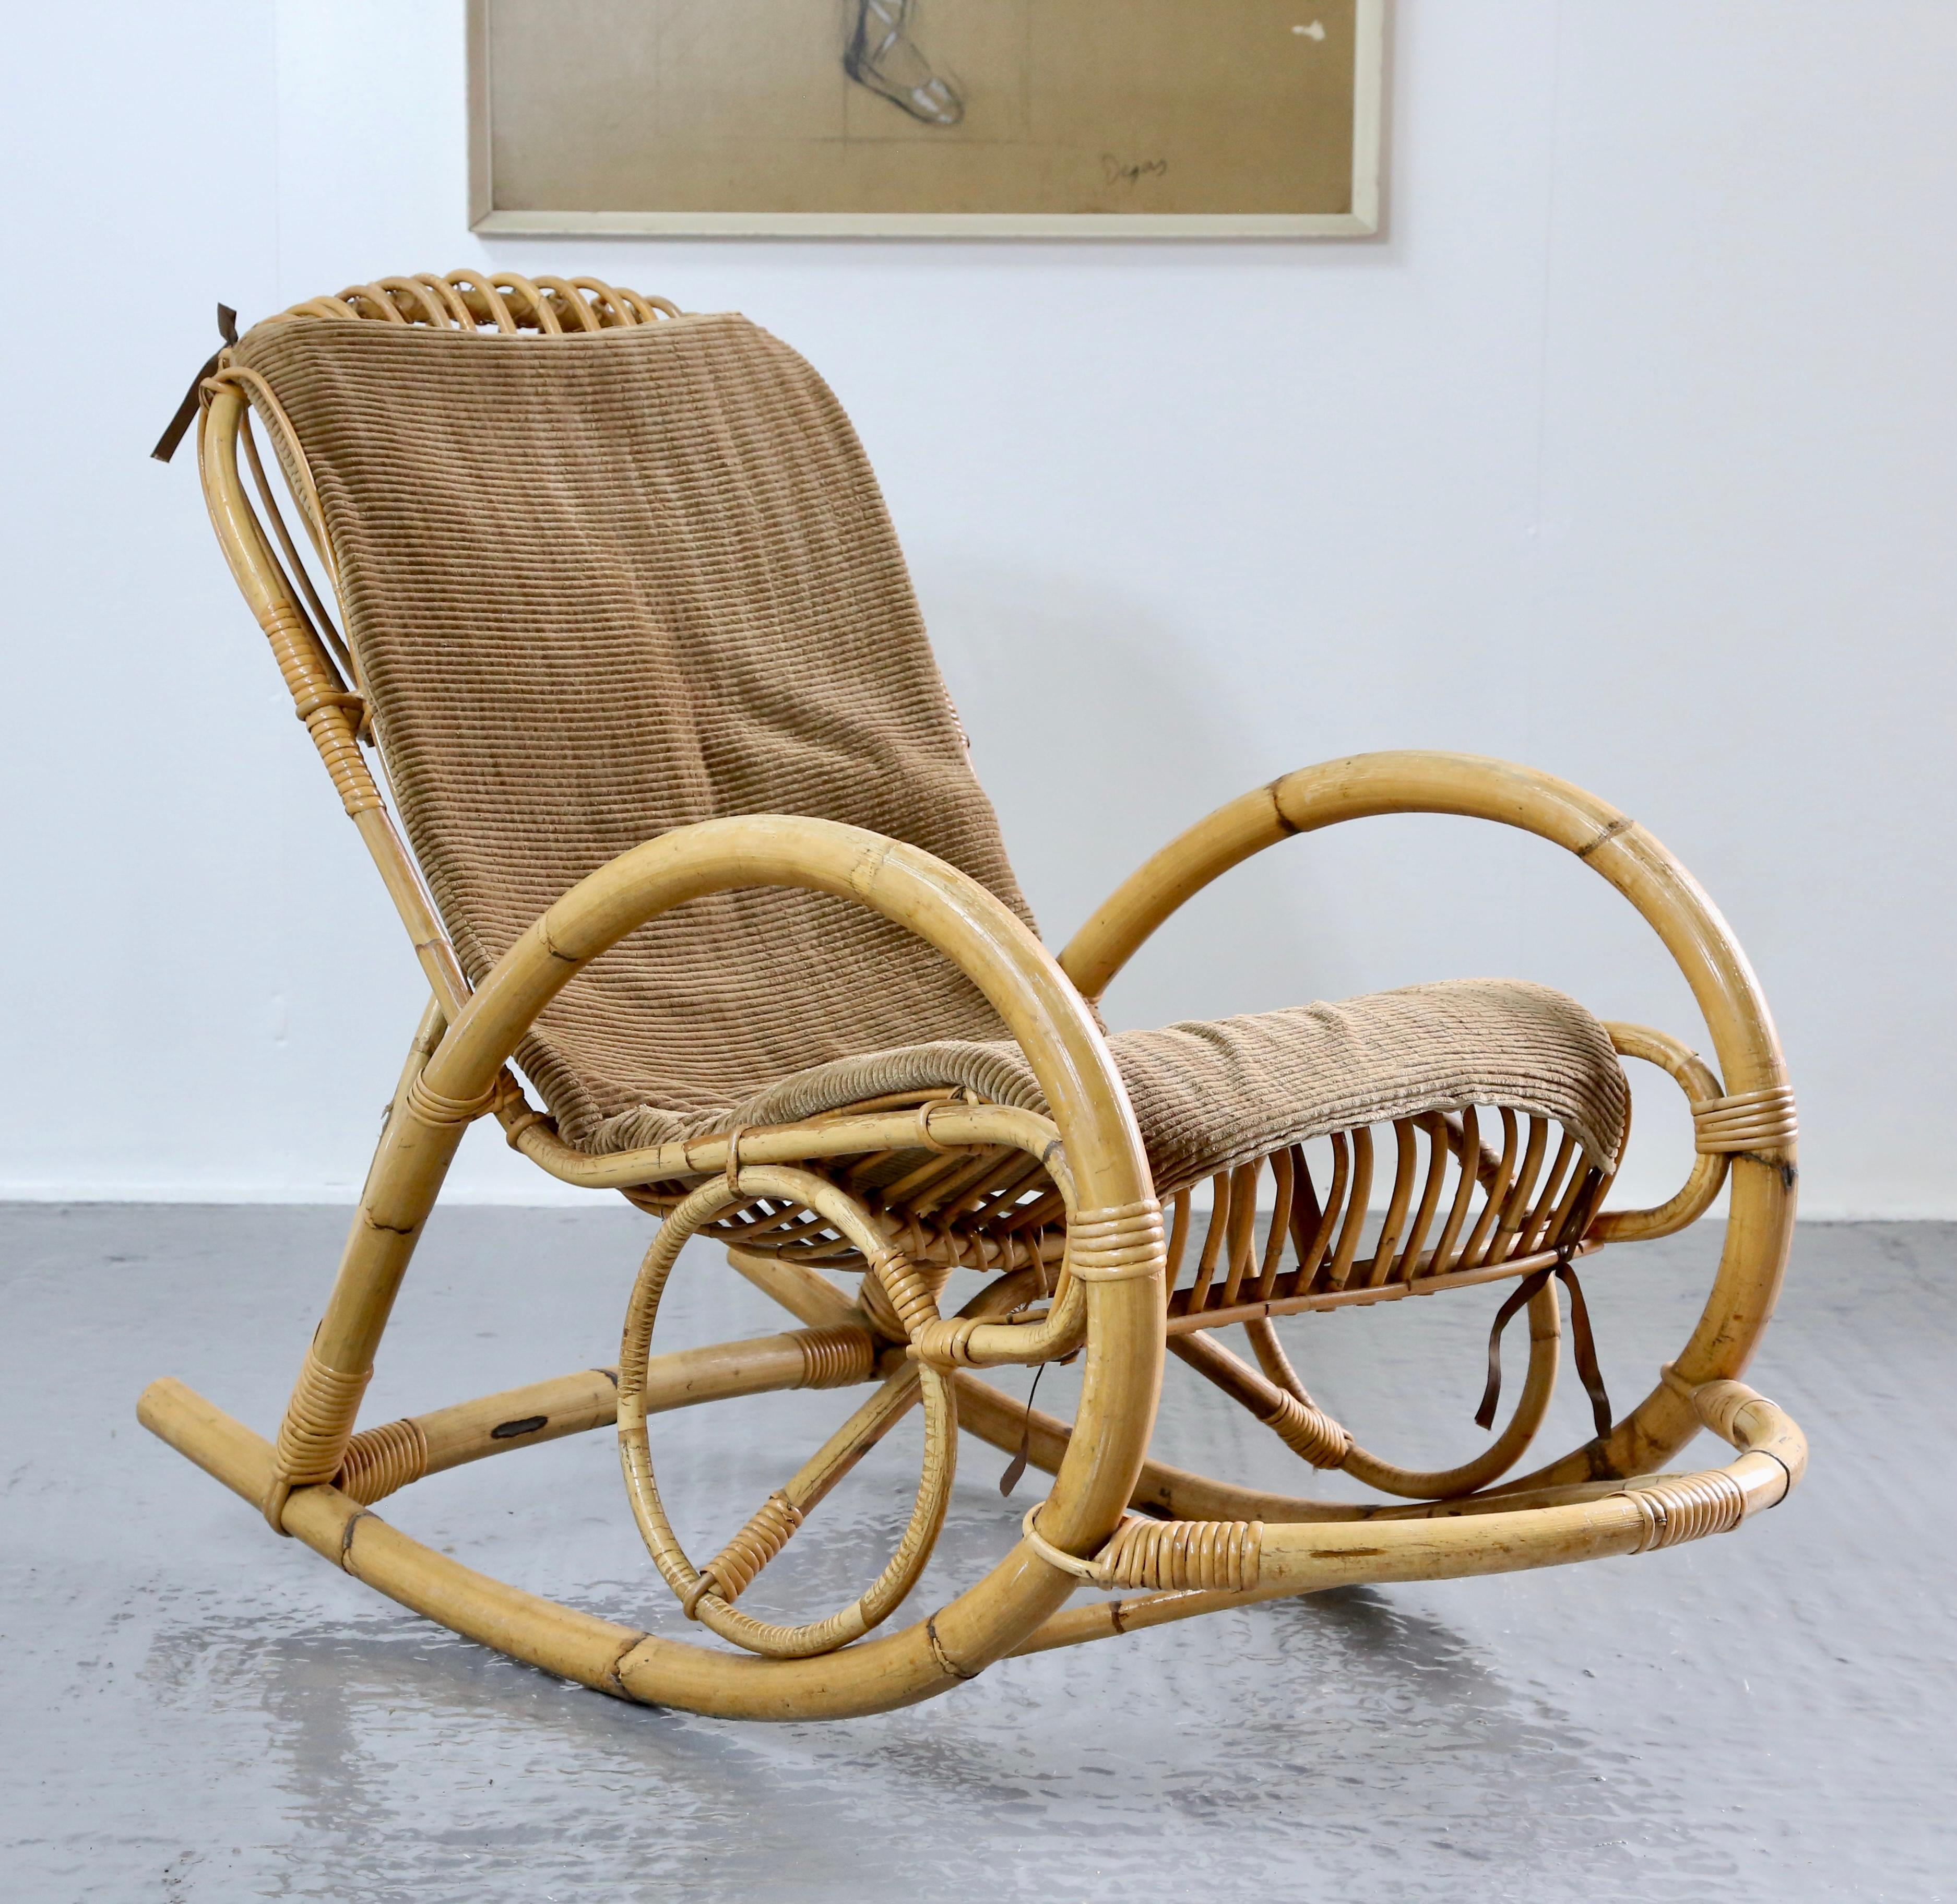 Boho Style Bamboo Wicker Rocking Chair By Dirk Van Sliedregt For Rohe Noordwolde For Sale 3